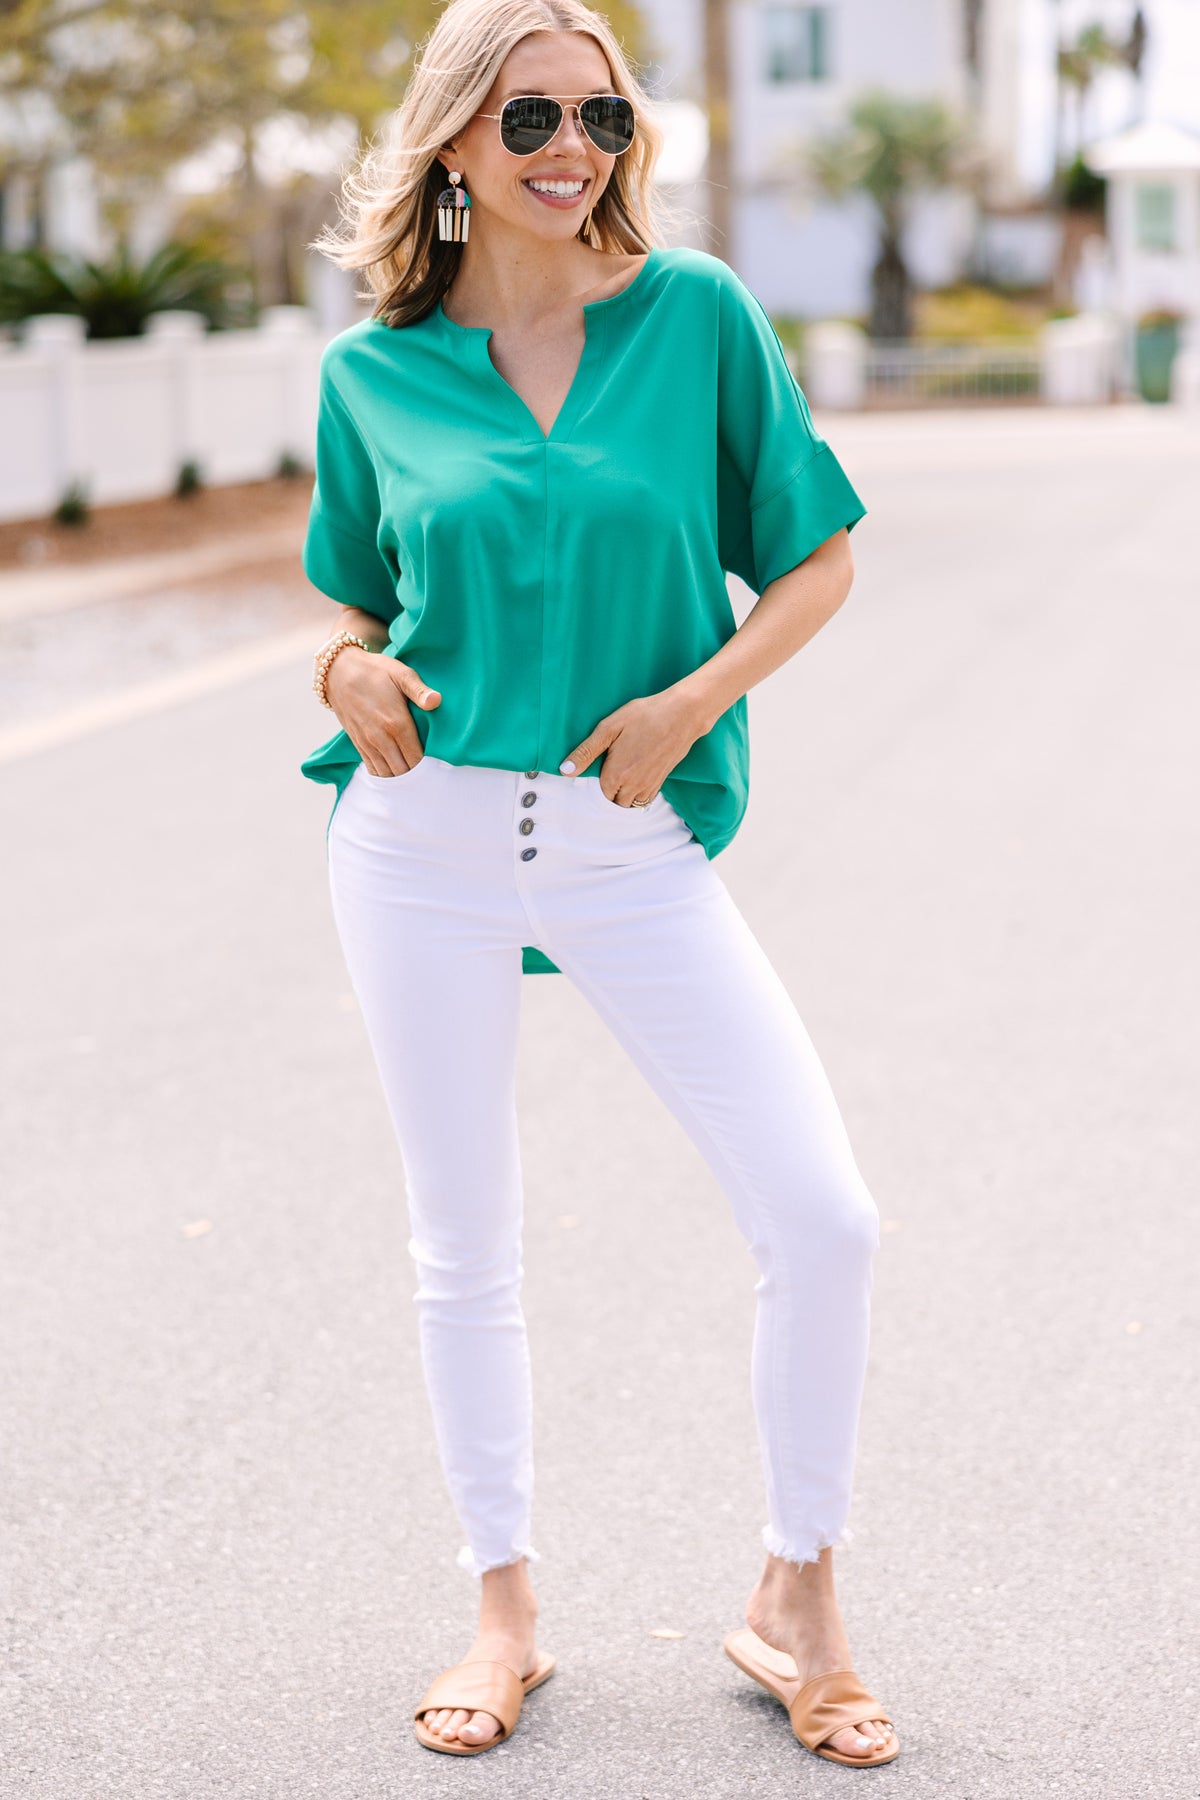 This Is Why Kelly Green Top – Shop the Mint